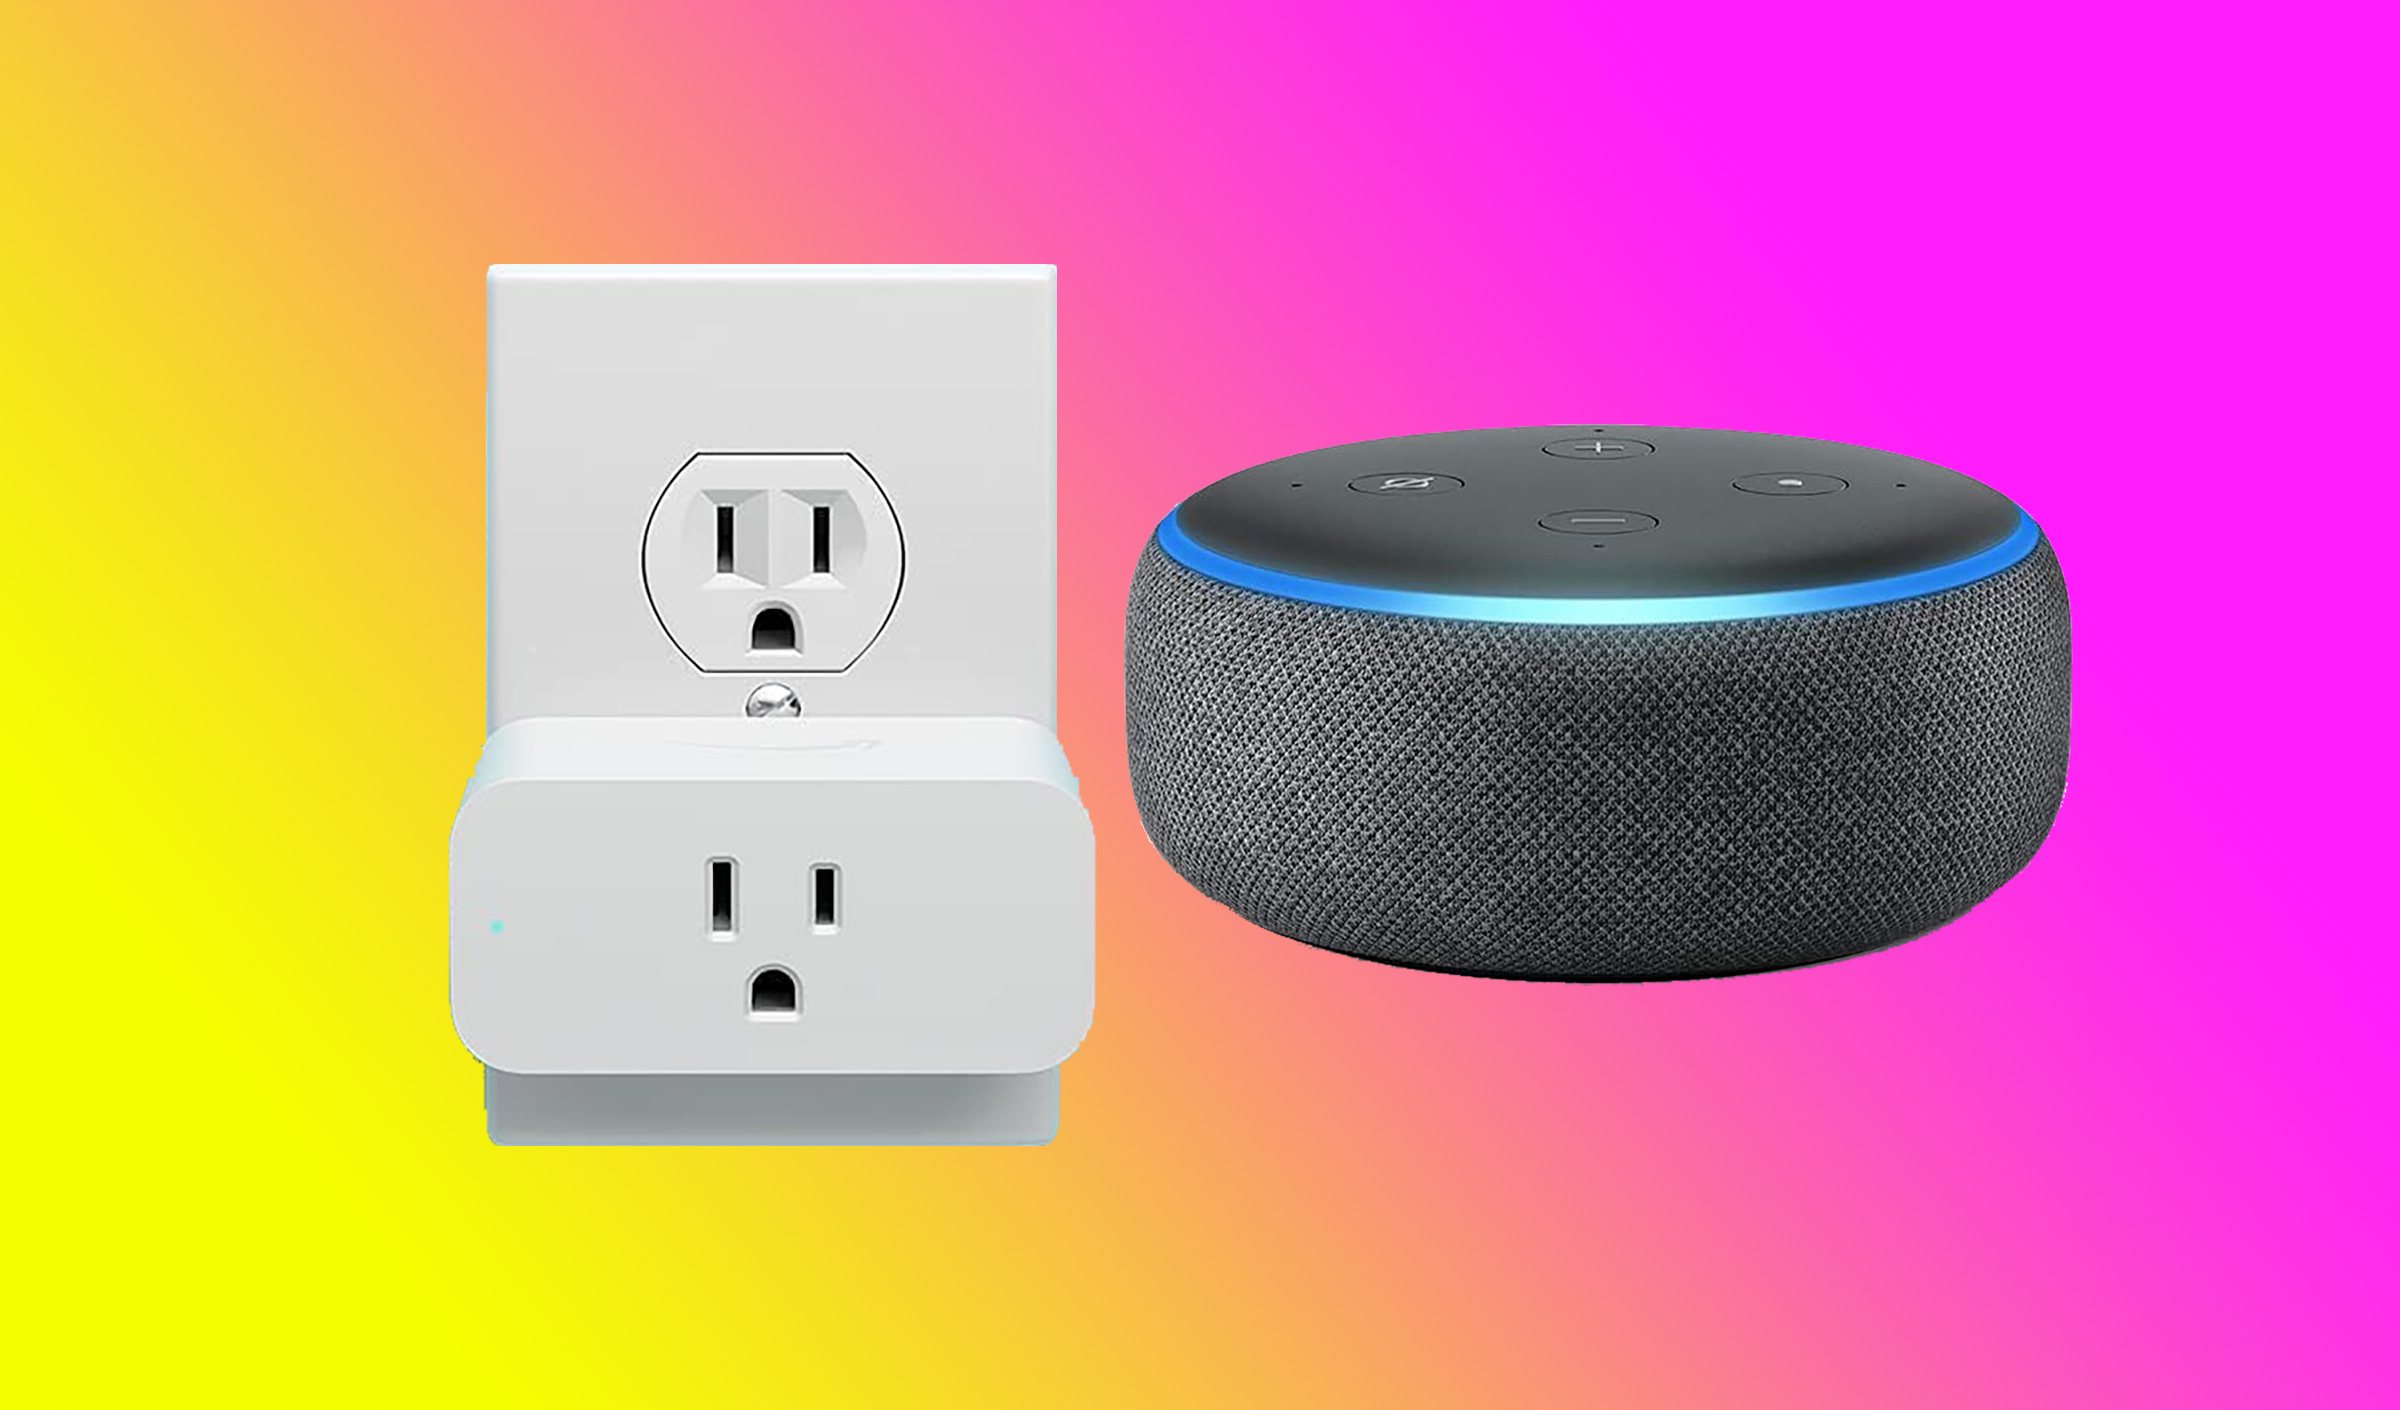 Here's how to get an  Echo Dot with Alexa for just 99 cents